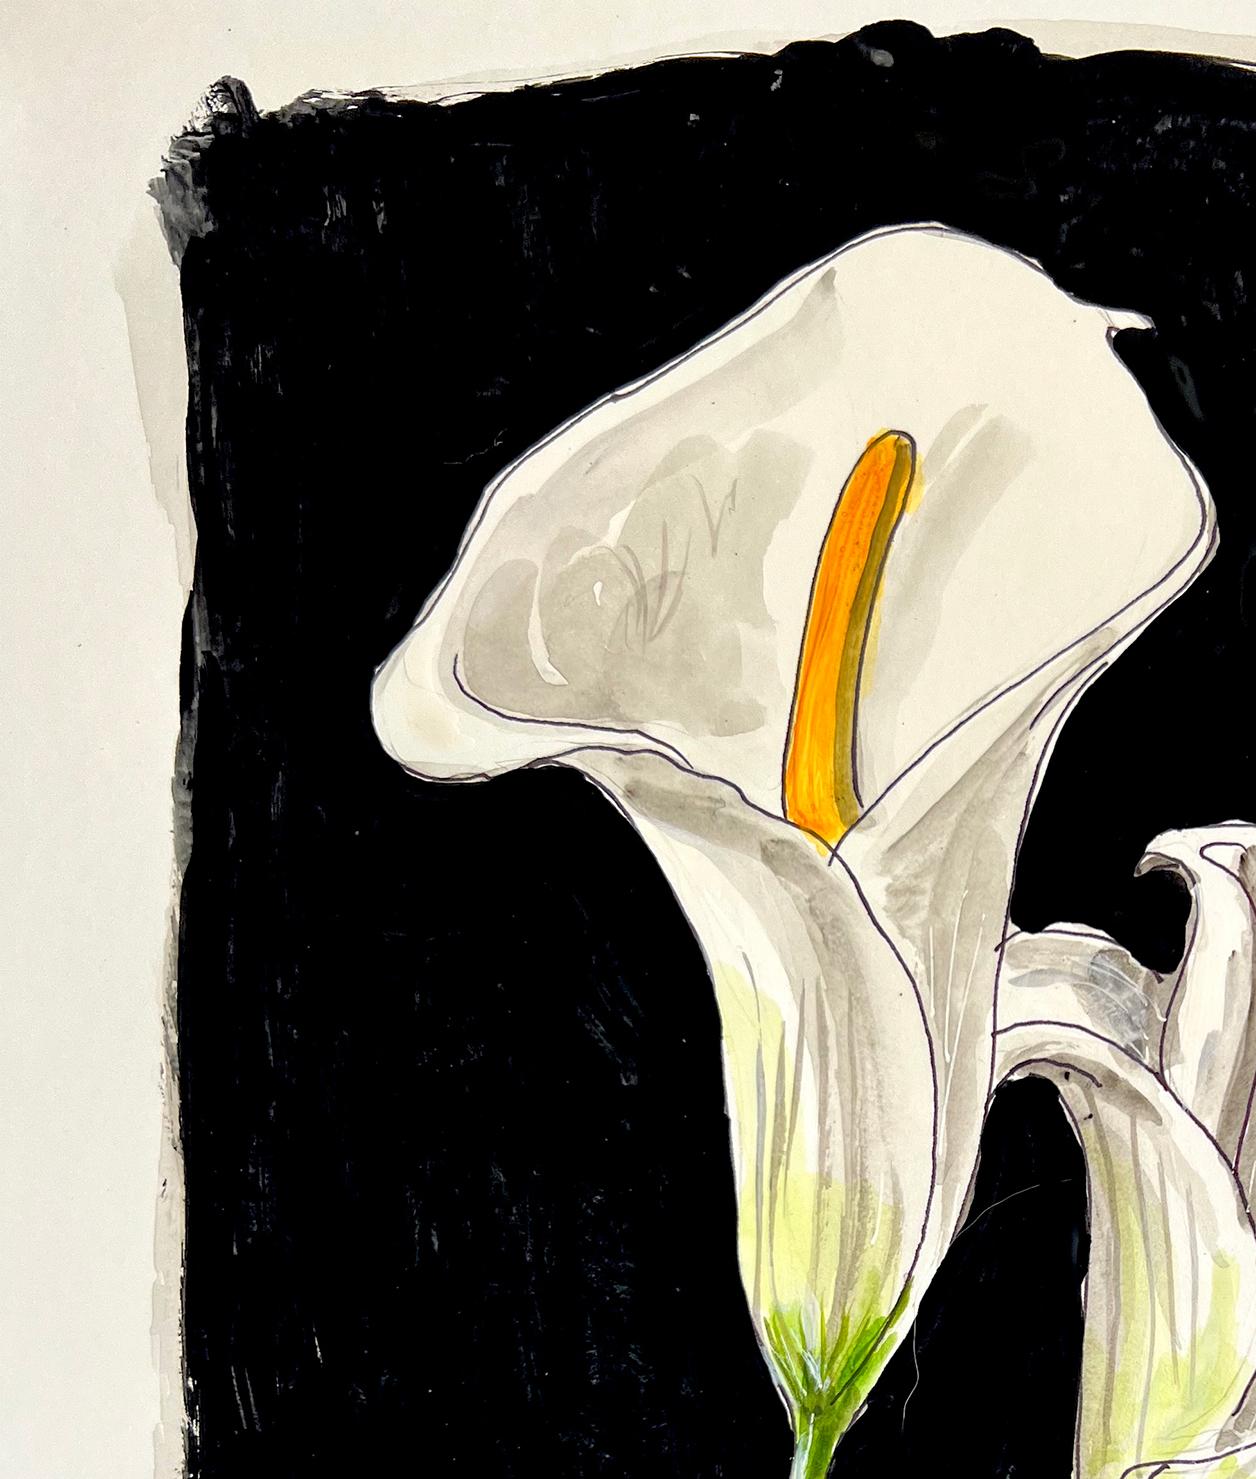 Cala Lily, by Manuel Santelices
Ink, watercolor, and gouache on paper
Image size: 14 in. H x 11 in. W 
Unframed
2023

The worlds of fashion, society, and pop culture are explored through the illustrations of Manuel Santelices, a Chilean artist and